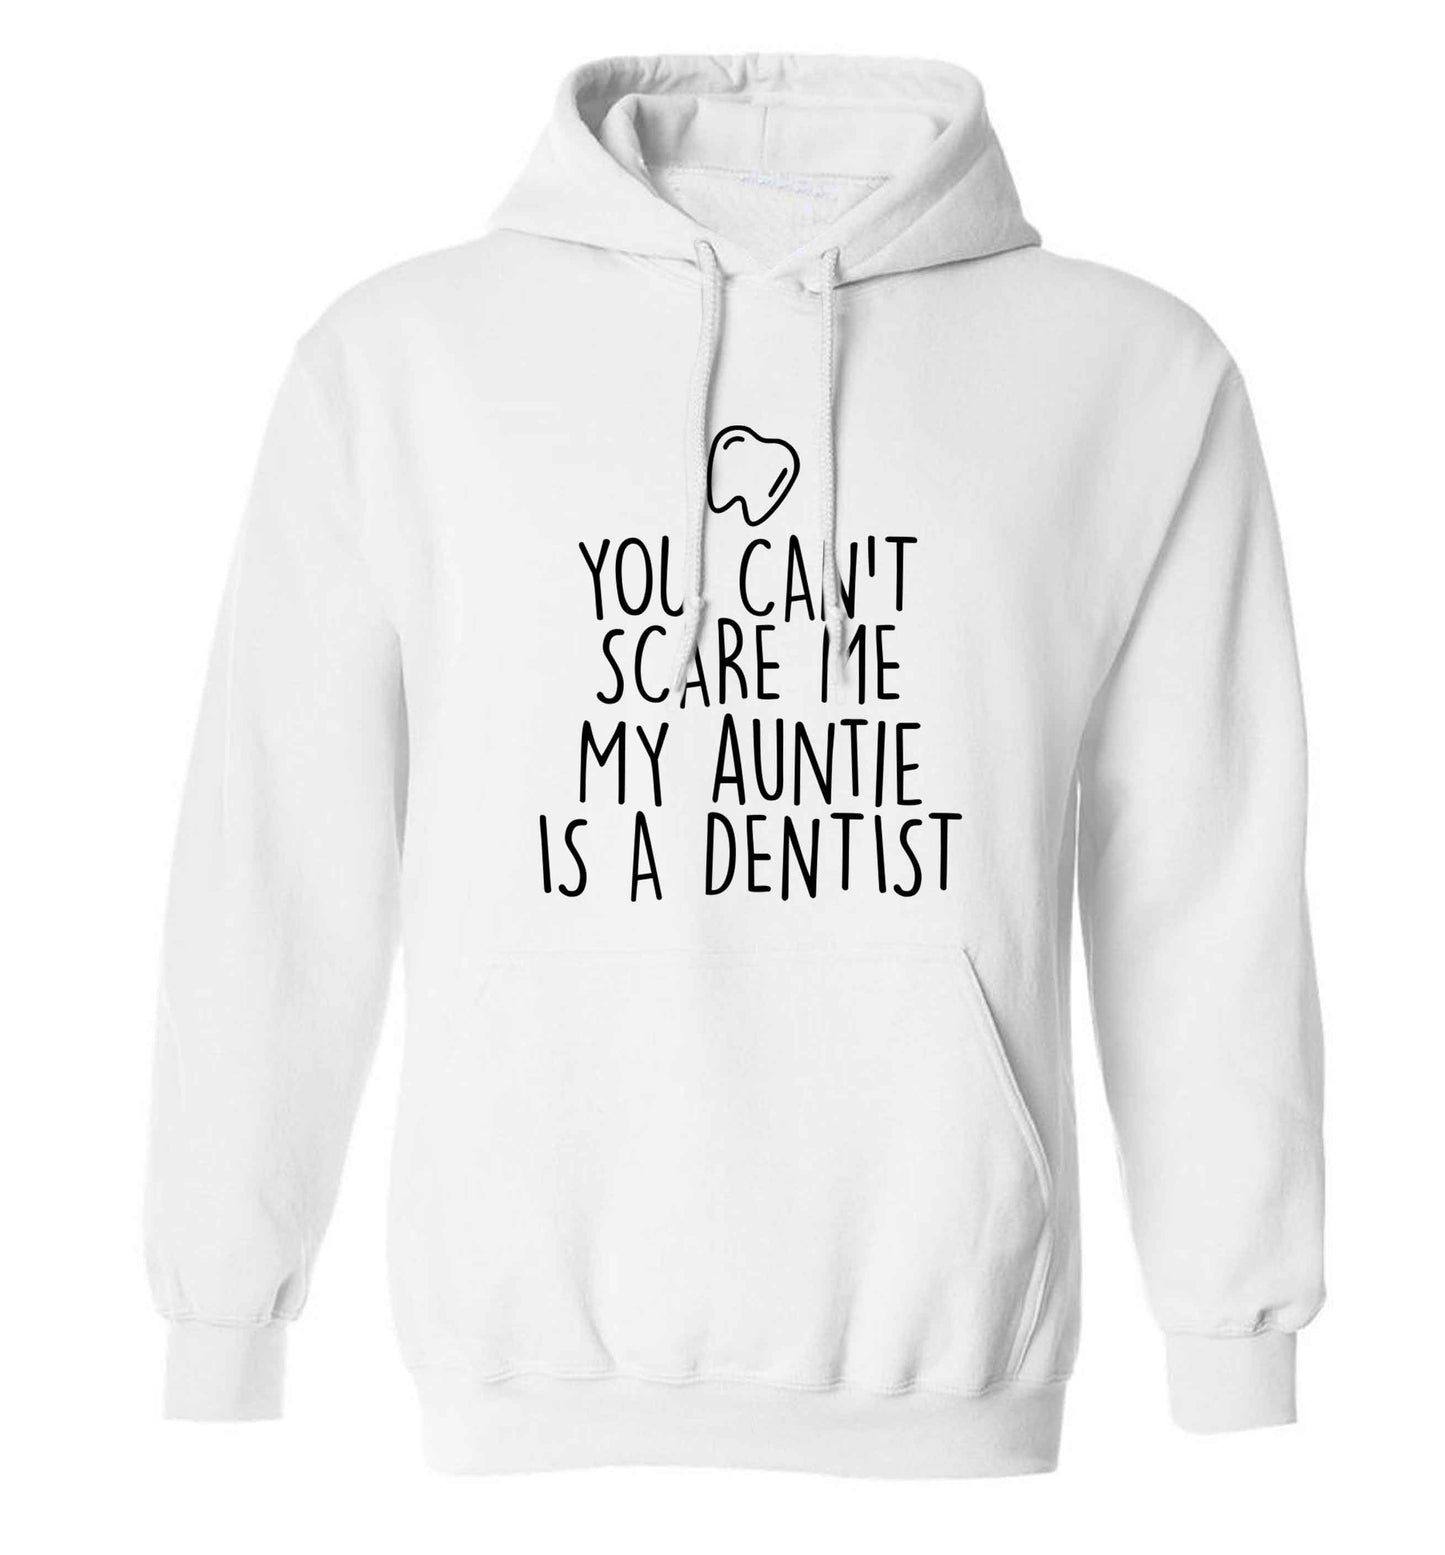 You can't scare me my auntie is a dentist adults unisex white hoodie 2XL